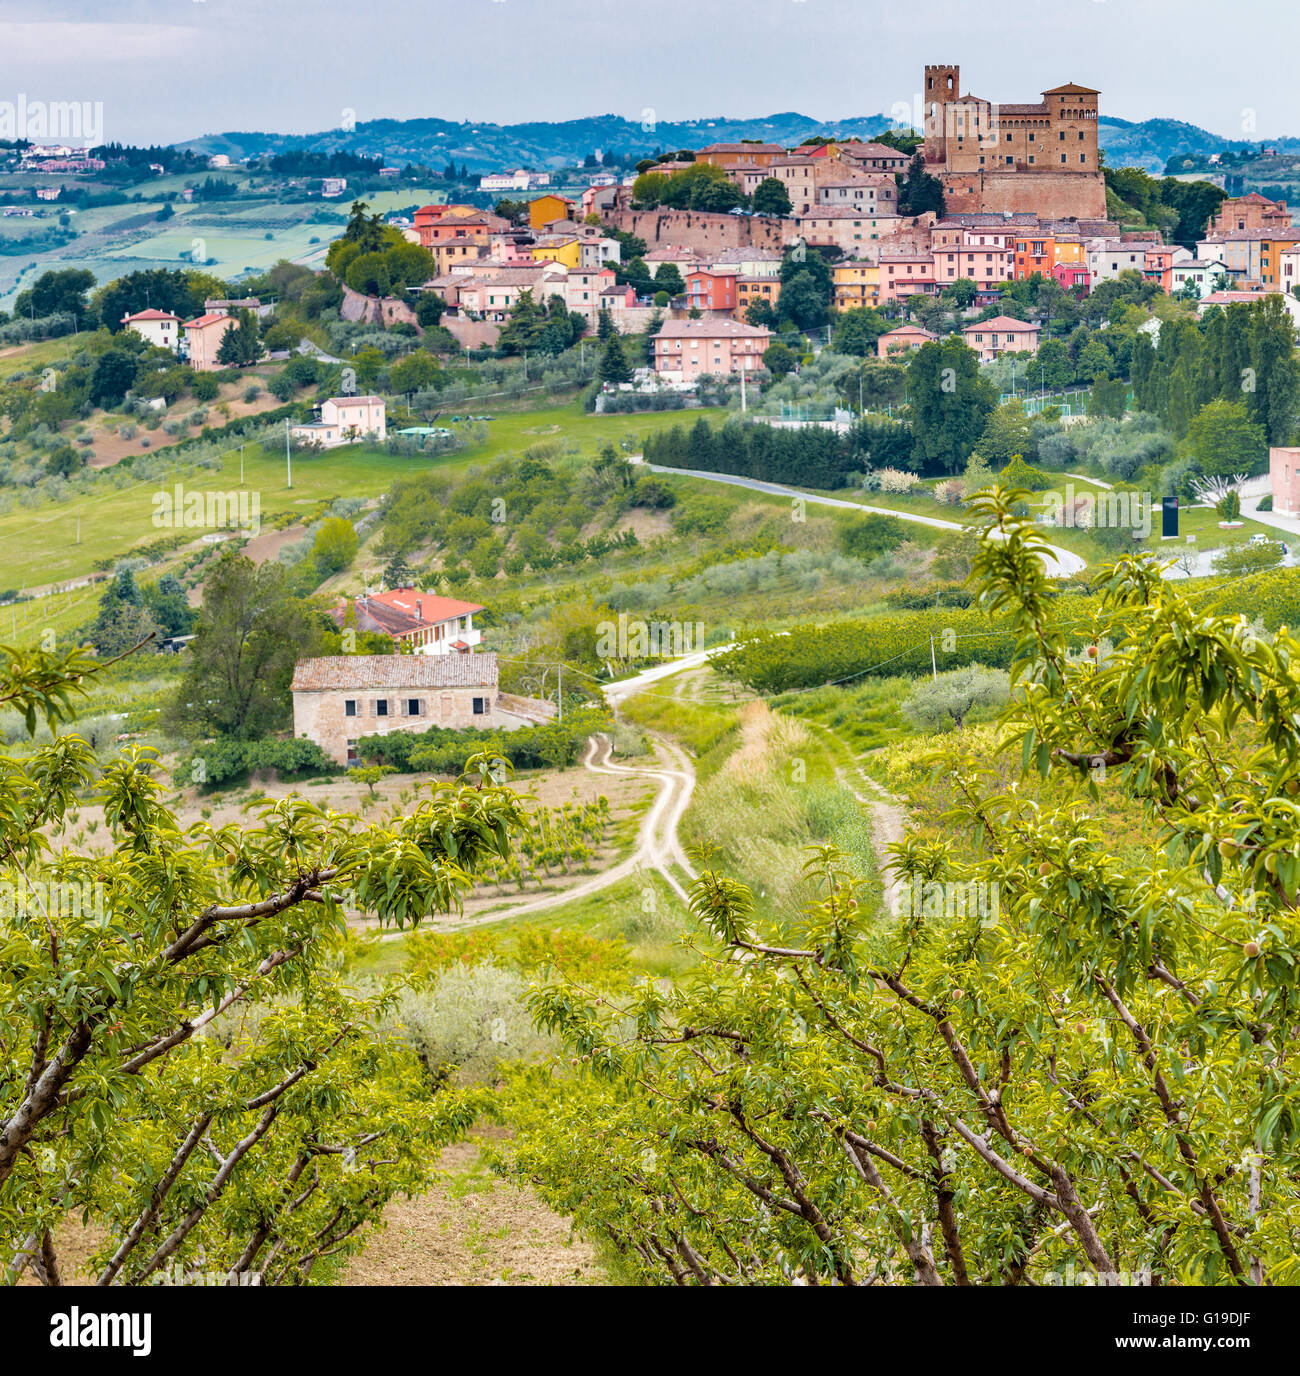 the medieval castle overlooking the hilly countryside surrounding the colorful houses of the charming mountain town of Longiano, near Cesena, Italy Stock Photo